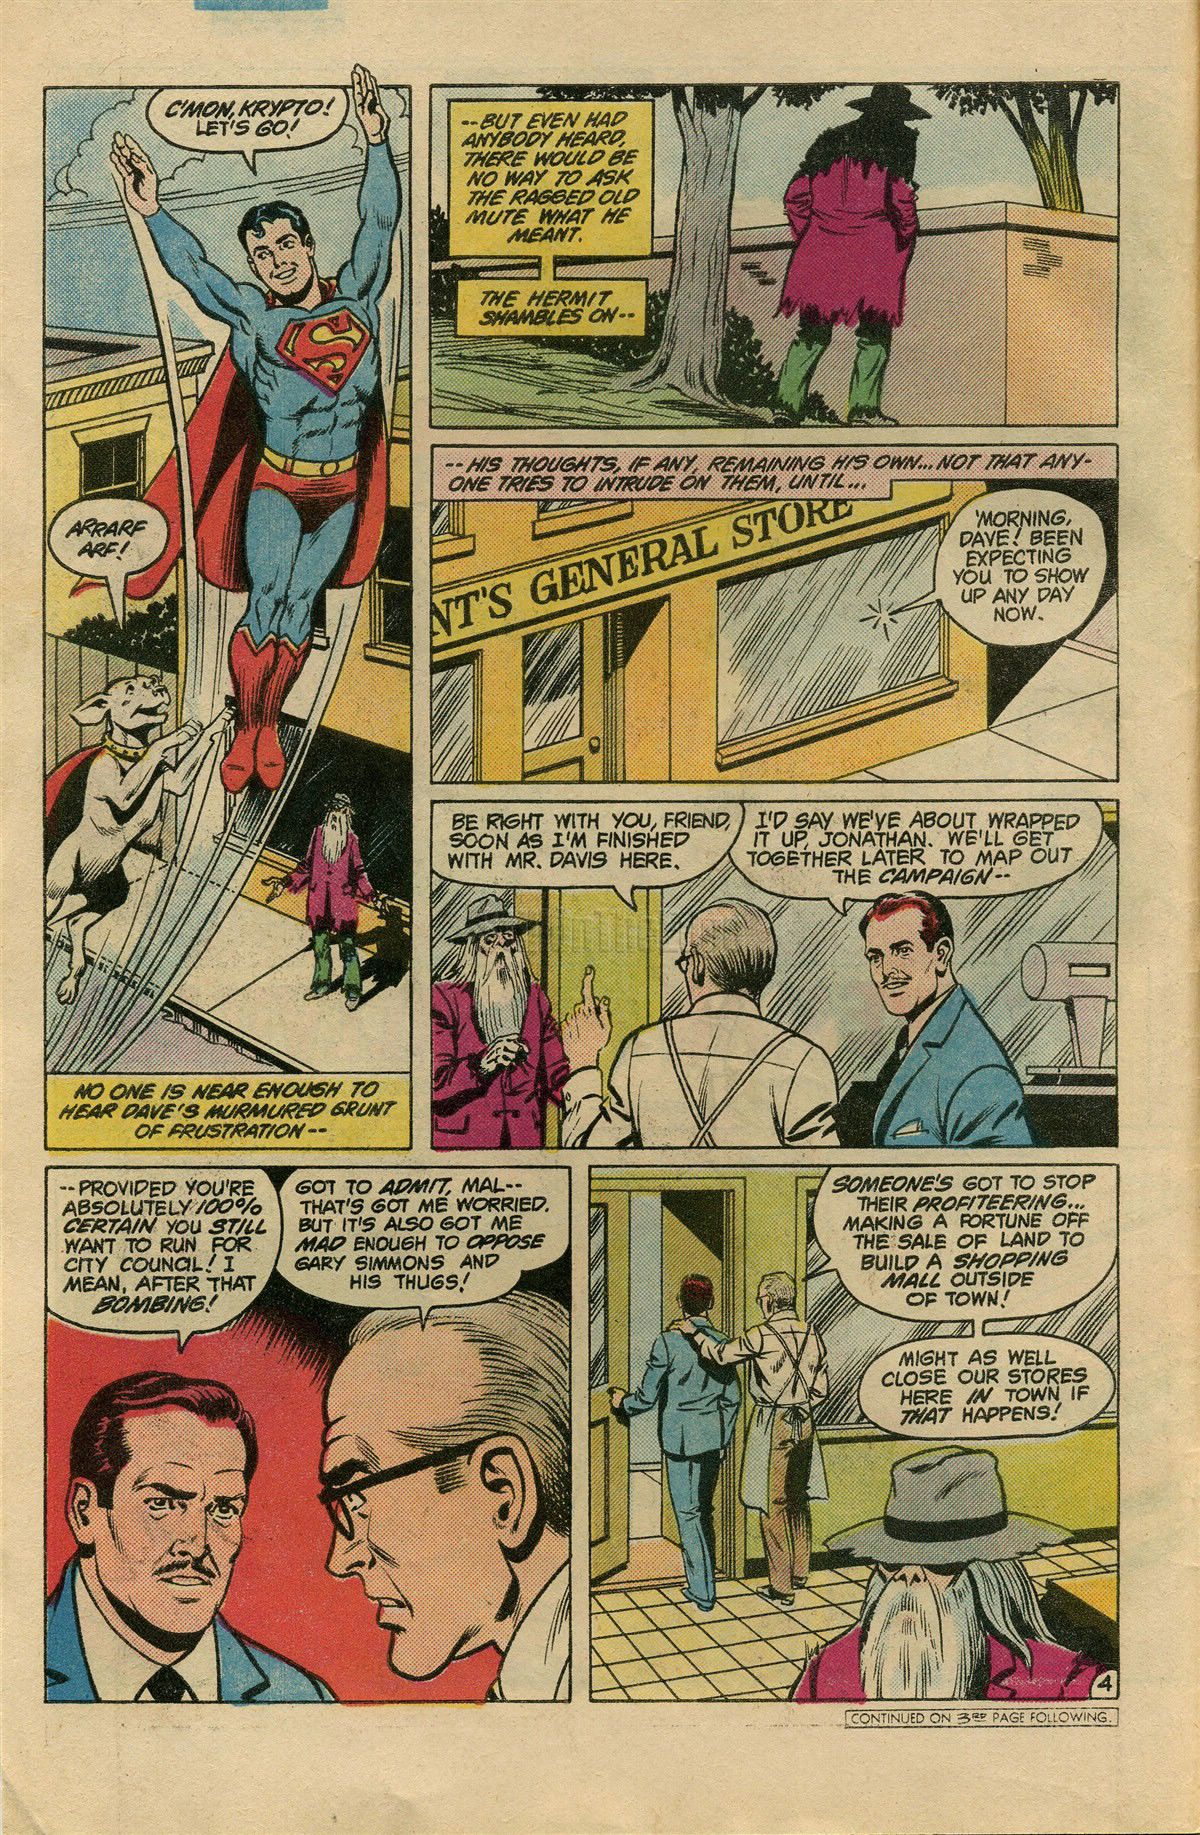 The New Adventures of Superboy 52 Page 4